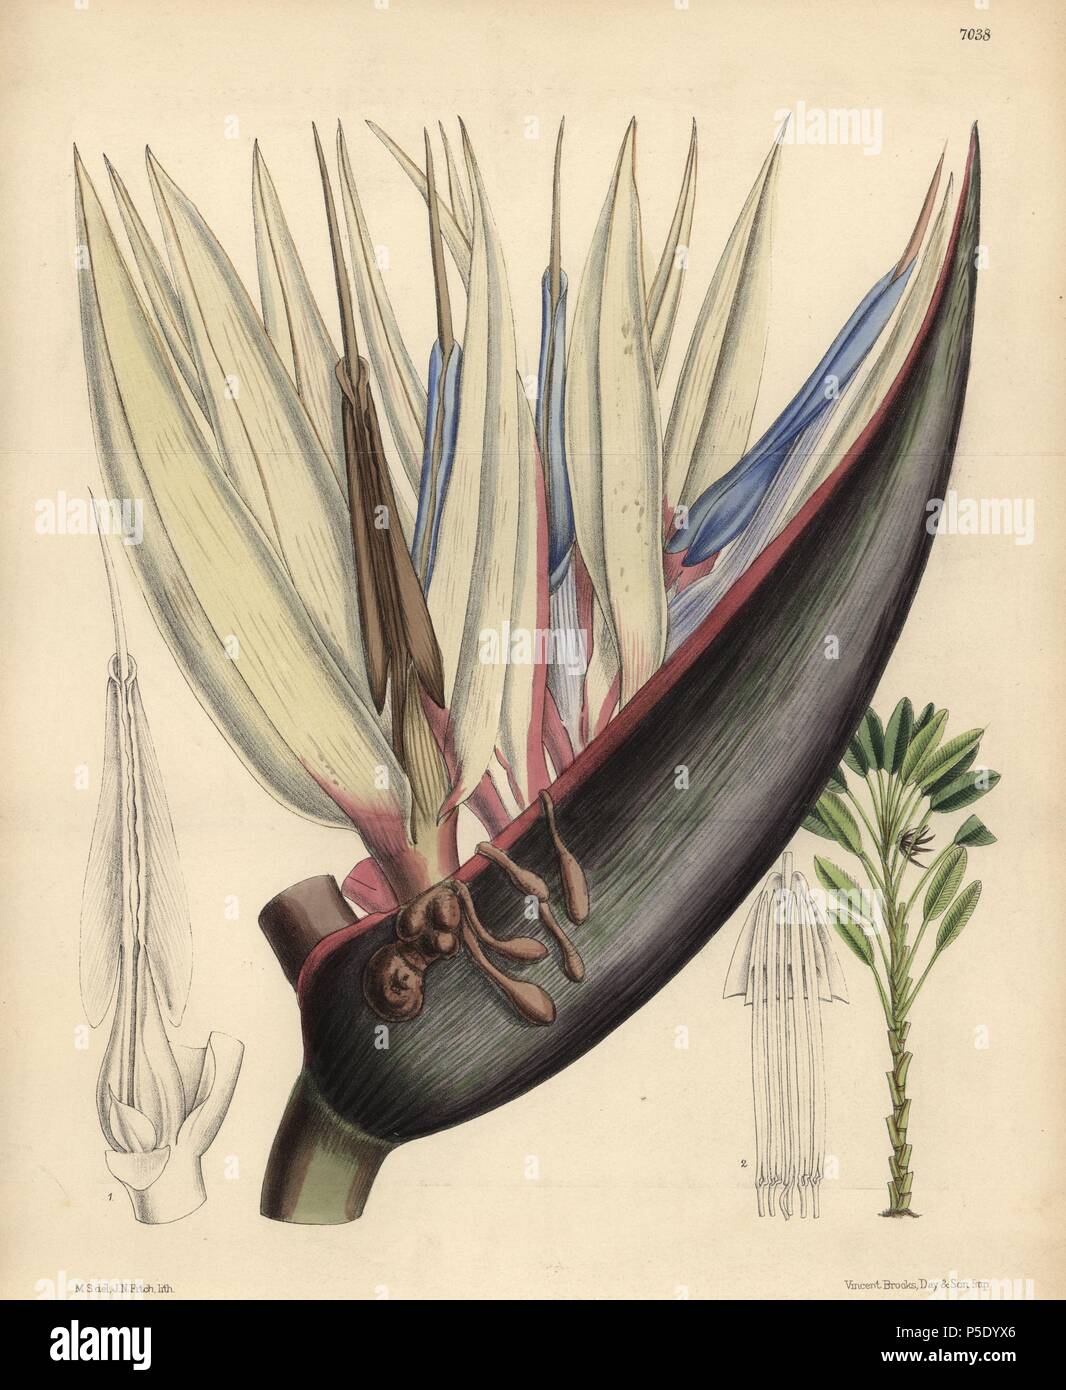 Strelitzia nicolai, blue bird-of-paradise flower, native of South Africa. Hand-coloured botanical illustration drawn by Matilda Smith and lithographed by J.N. Fitch from Joseph Dalton Hooker's 'Curtis's Botanical Magazine,' 1889, L. Reeve & Co. A second-cousin and pupil of Sir Joseph Dalton Hooker, Matilda Smith (1854-1926) was the main artist for the Botanical Magazine from 1887 until 1920 and contributed 2,300 illustrations. Stock Photo